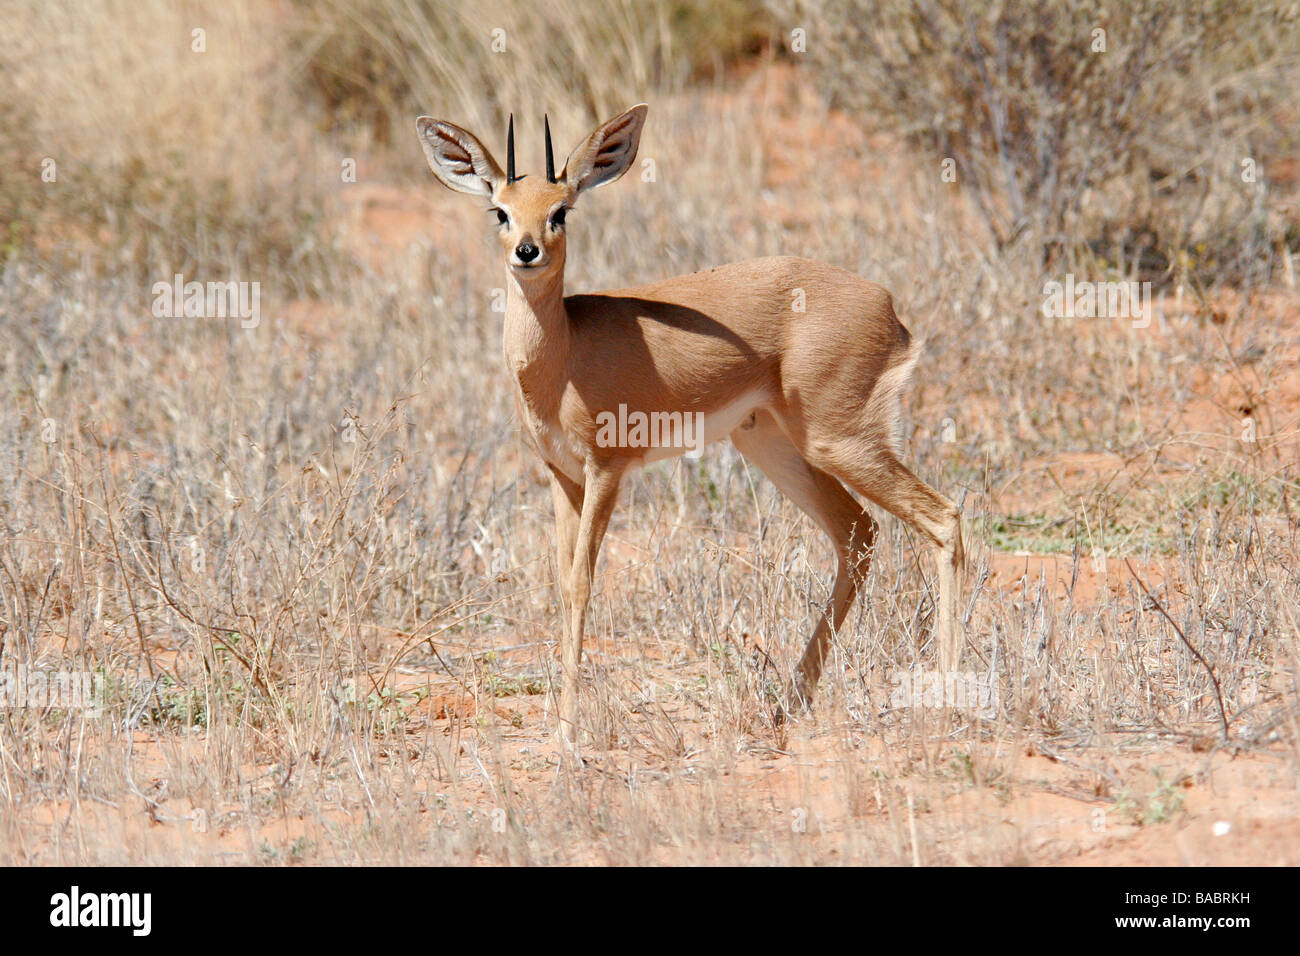 A small to medium-sized antelope species (duiker) stand in the Kgalagadi Transfrontier Park in South Africa's Northern Cape Stock Photo